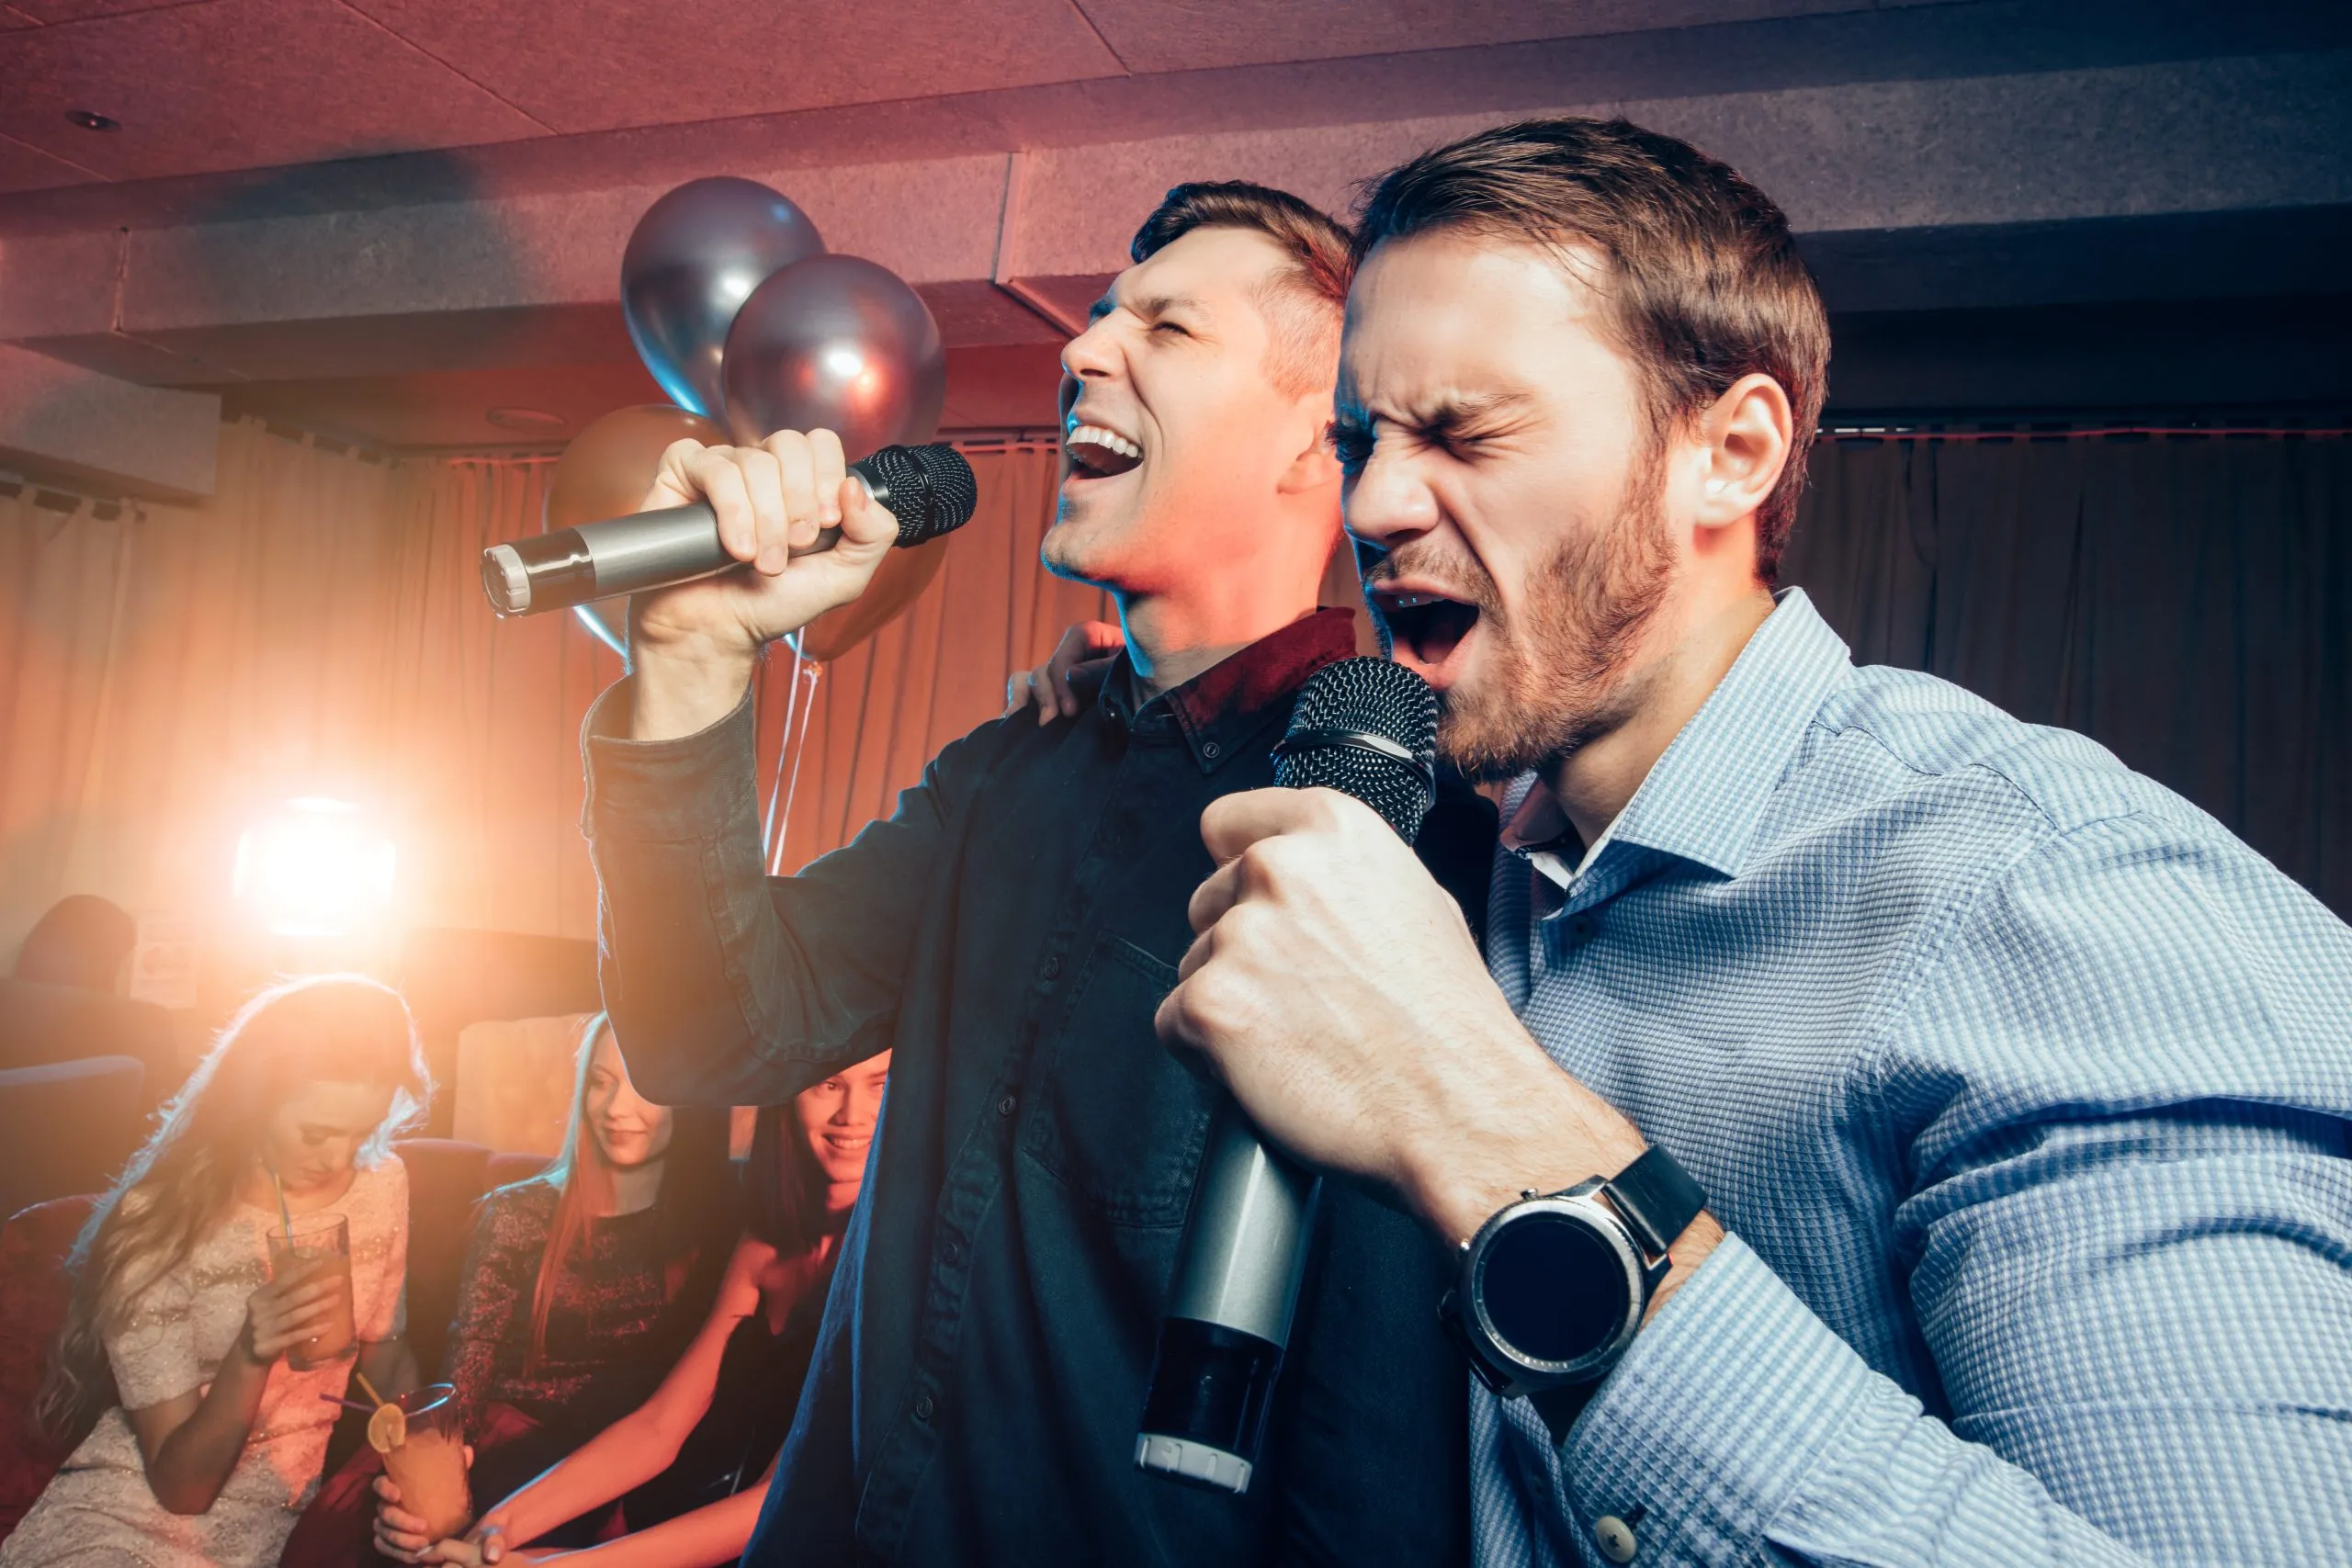 two young caucasian men in t-shirts singing in microphone in karaoke bar, having fun, celebrating. holiday, leisure, party concept